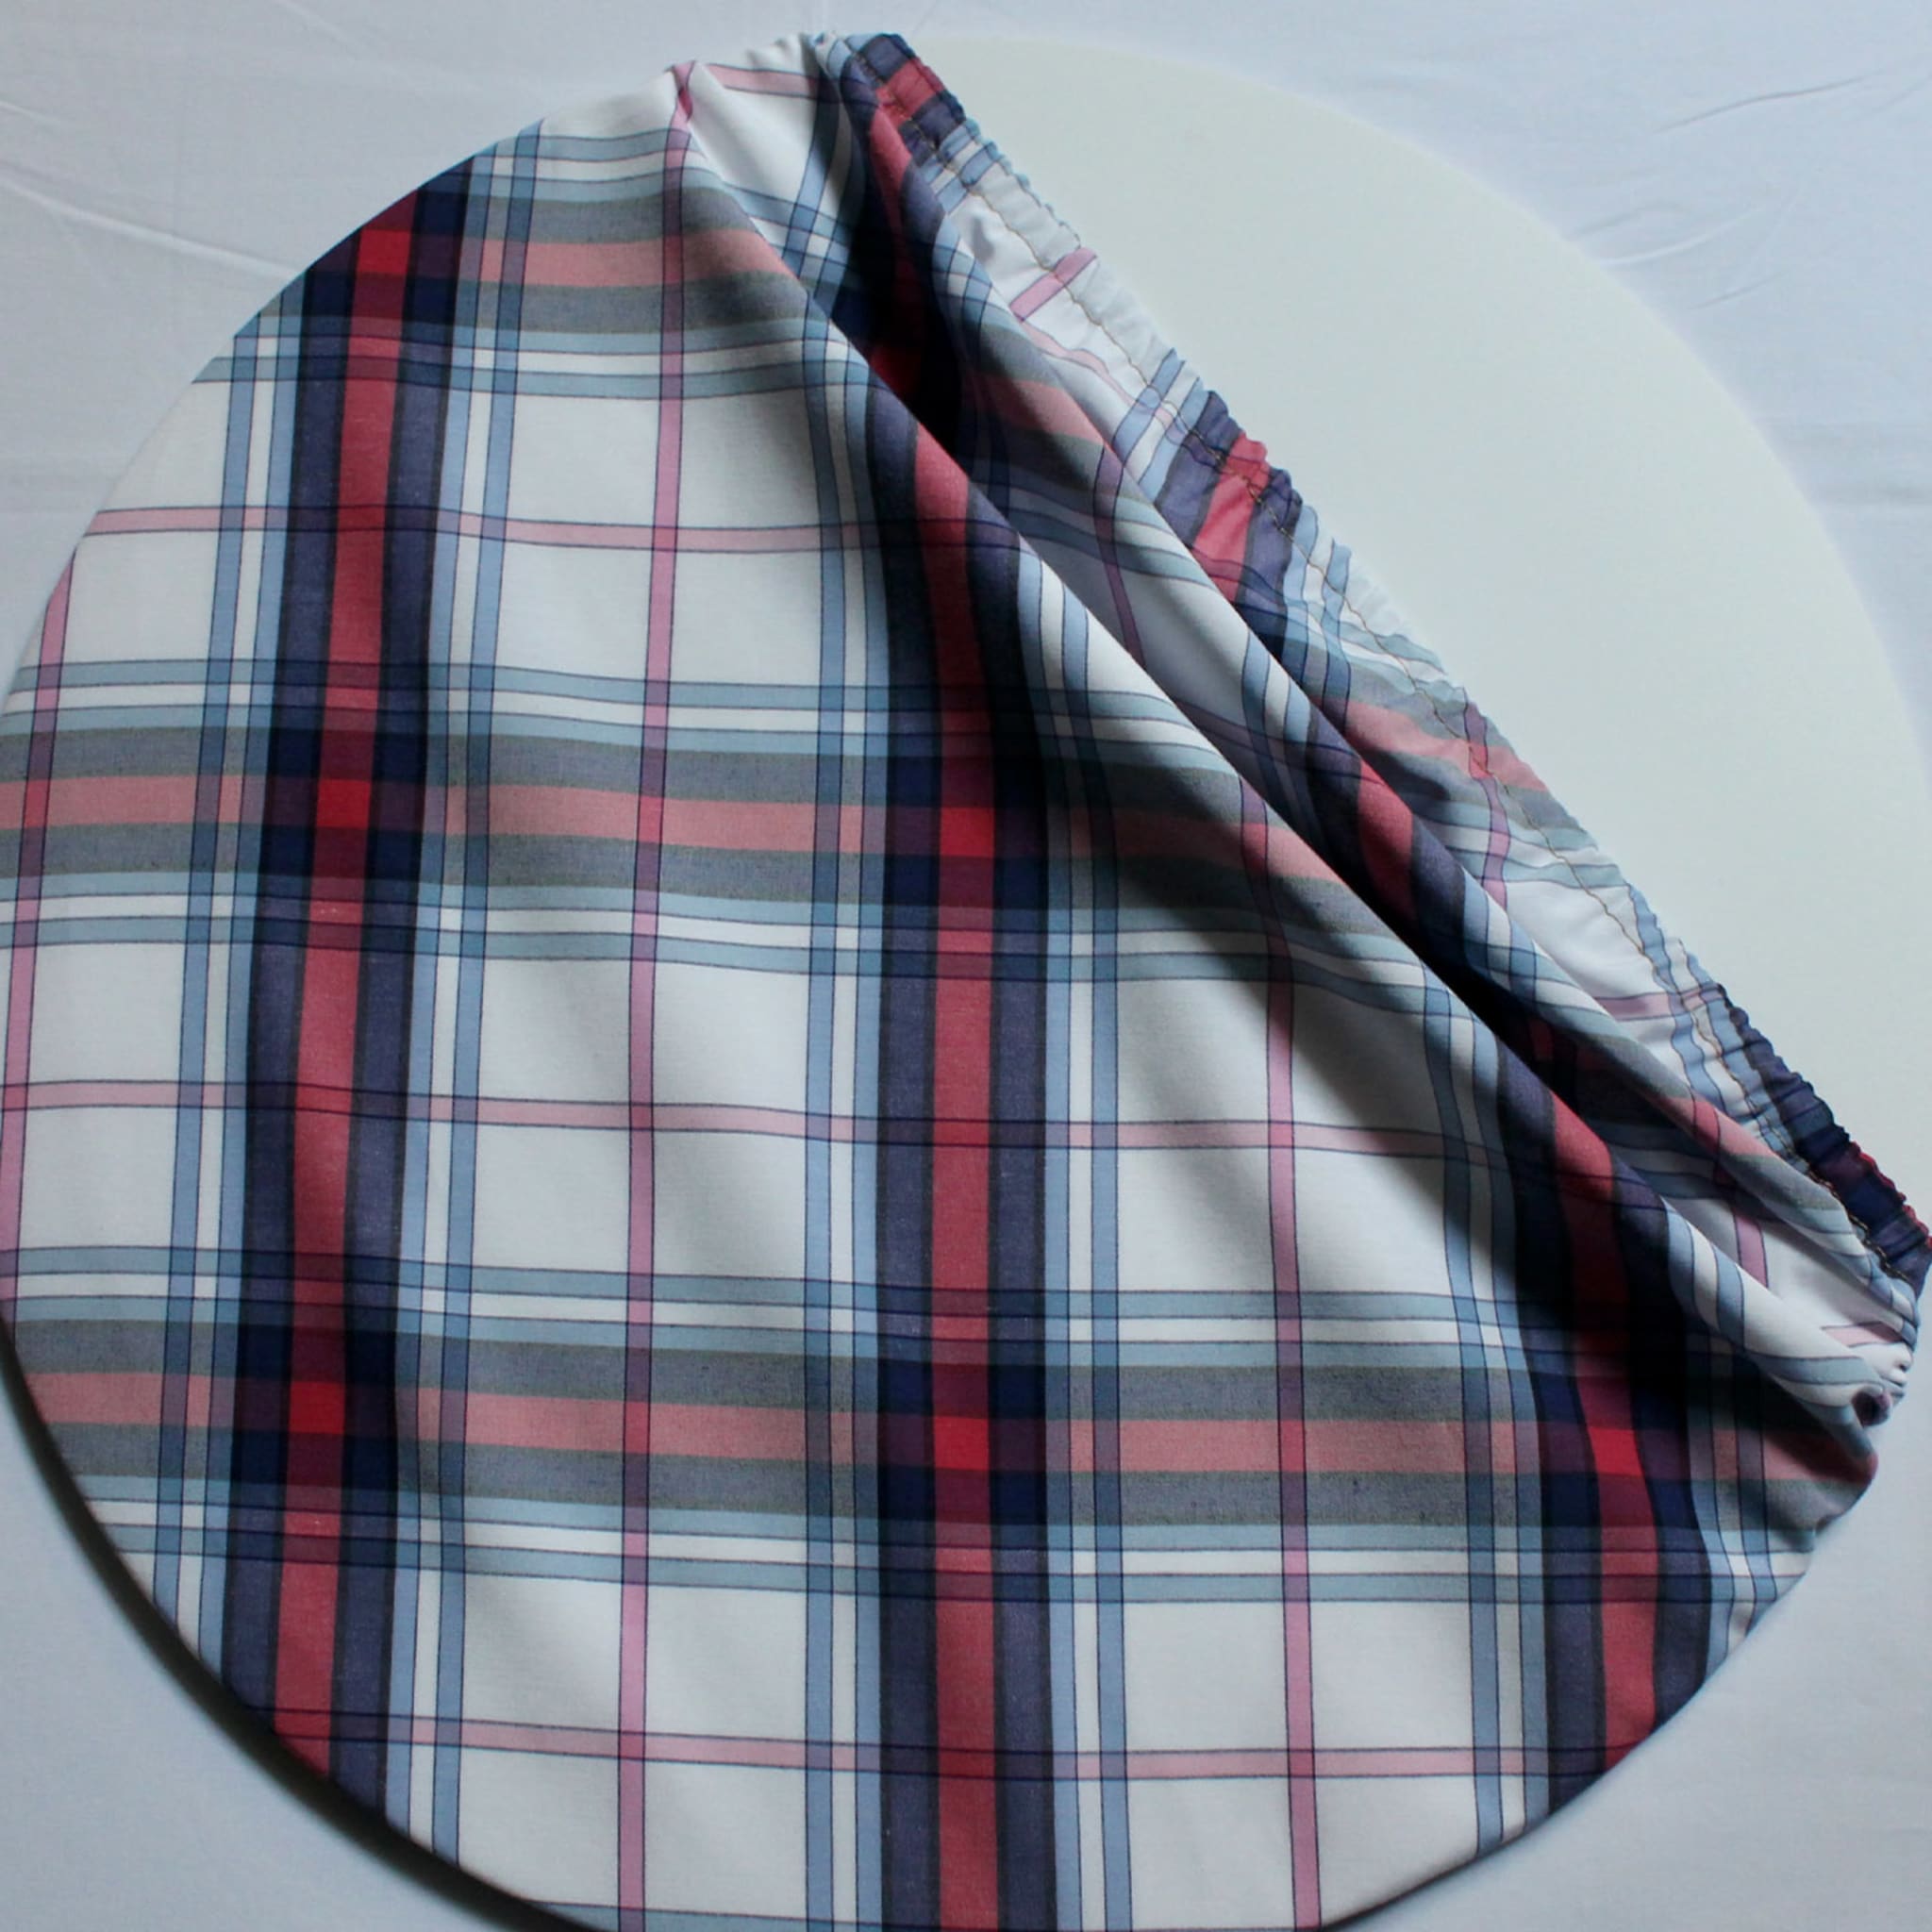 Cuffiette Check Round Blue & Red Placemat  - Alternative view 1